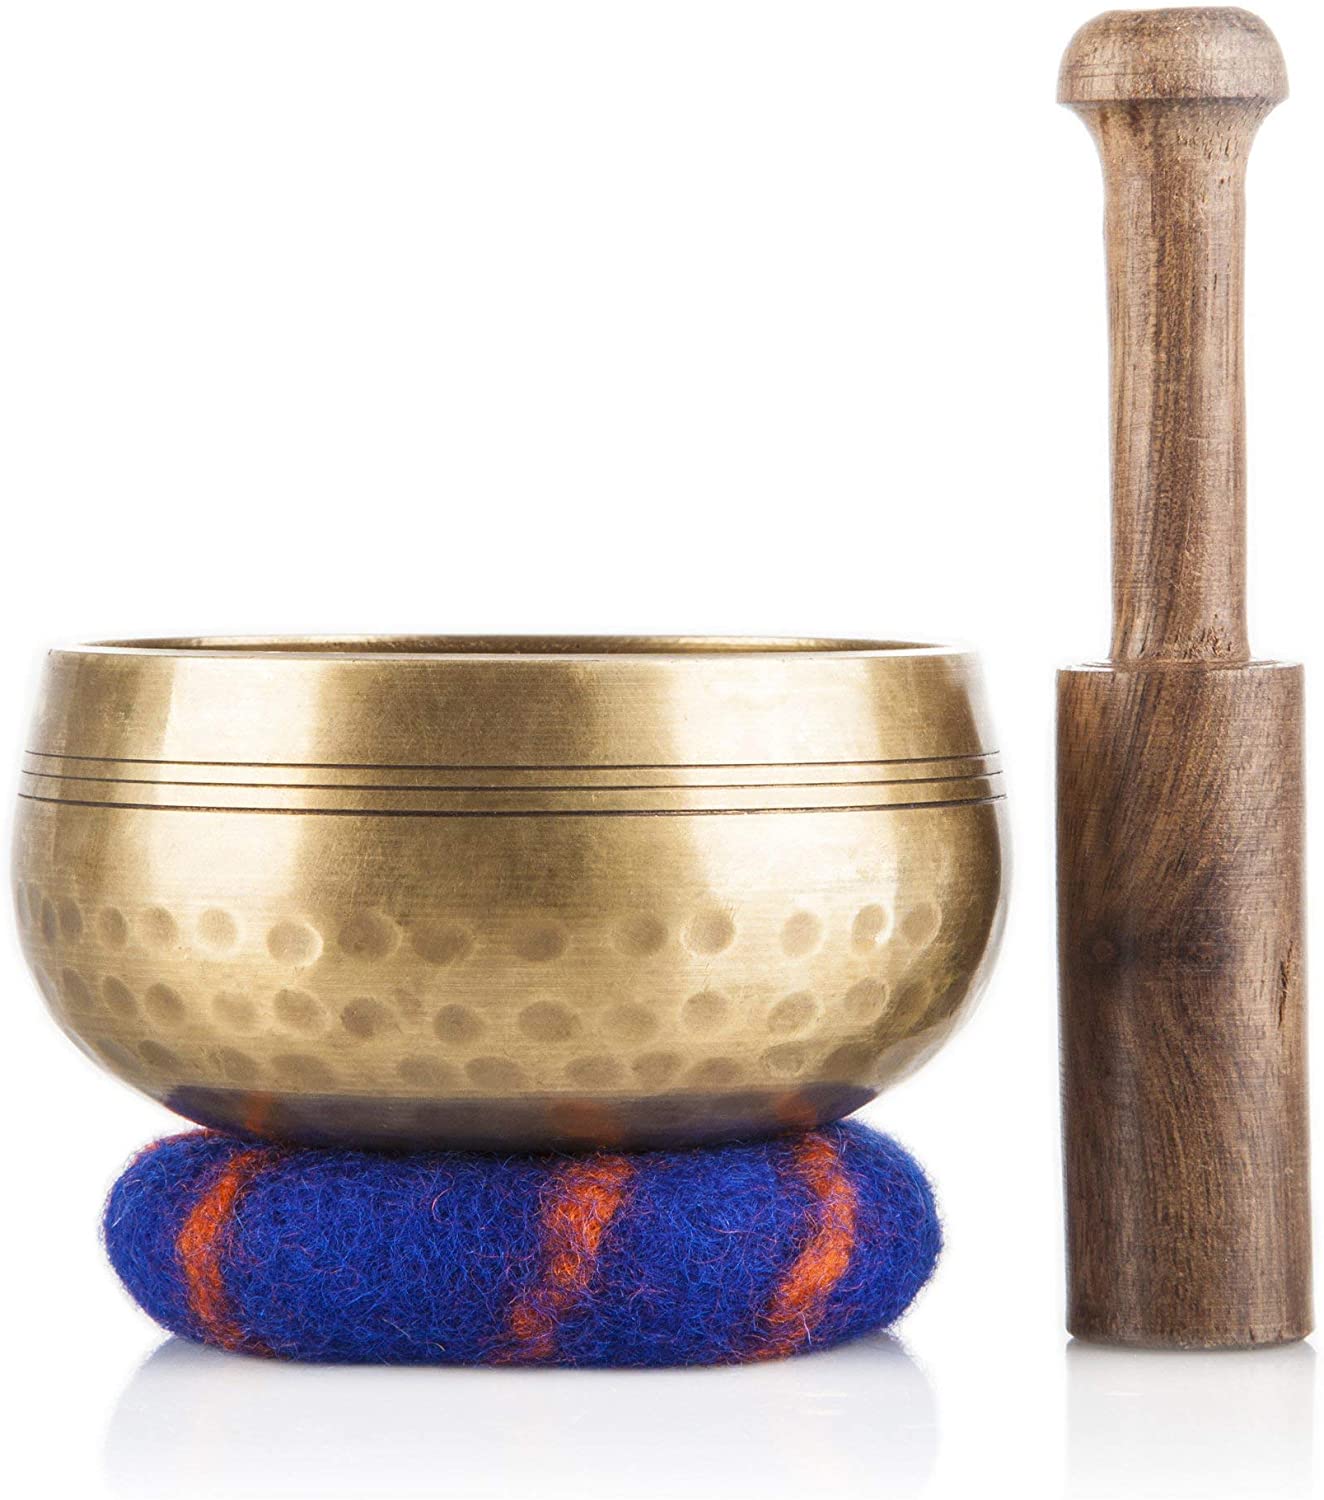 Tibetan Singing Bowl Set — Meditation Sound Bowl Handcrafted in Nepal for Healing and Mindfulness